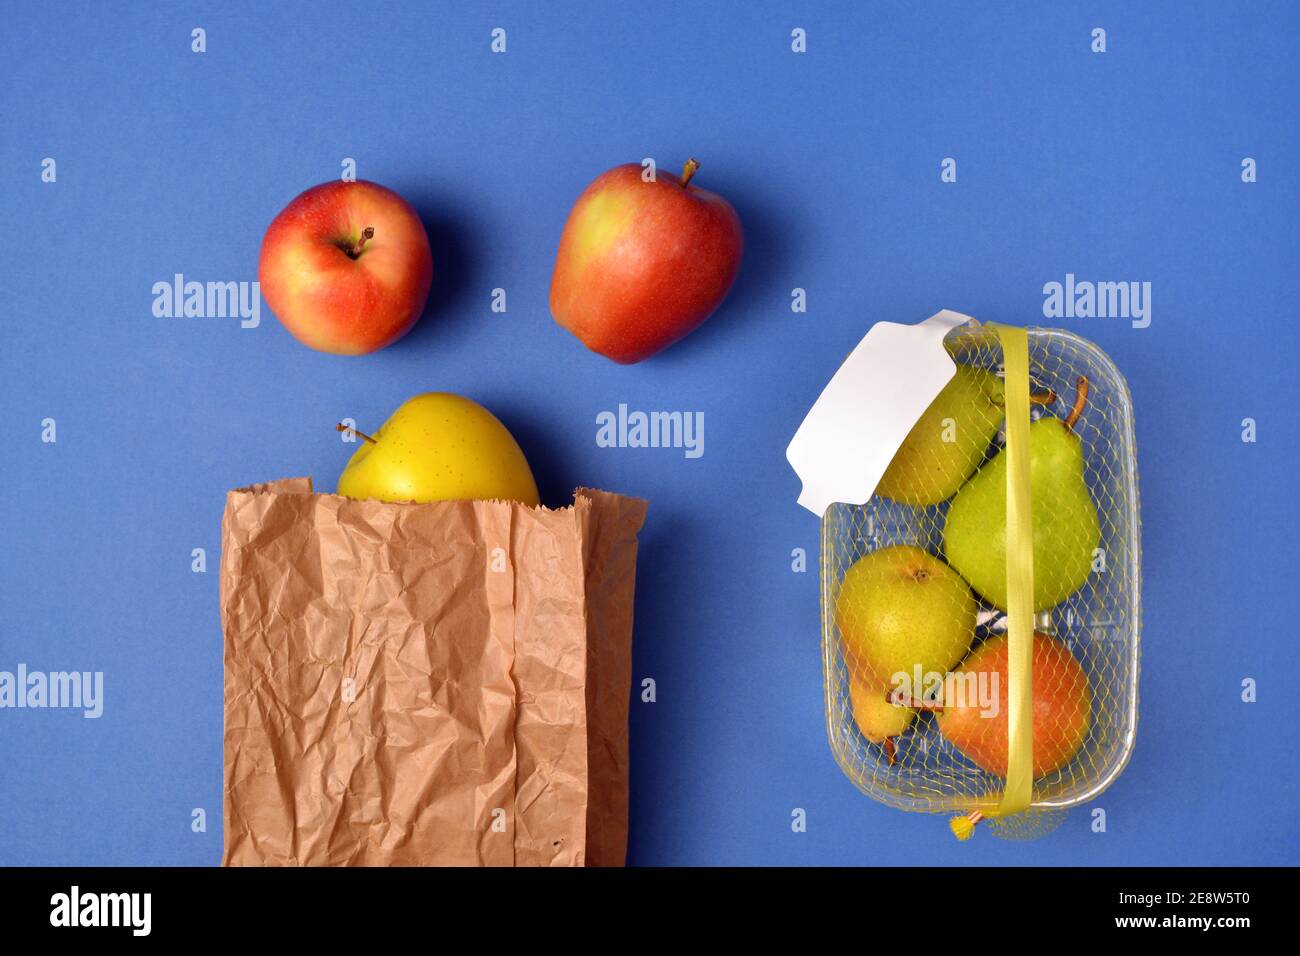 Detail of fruit purchased in plastic packaging and in paper bags Stock Photo